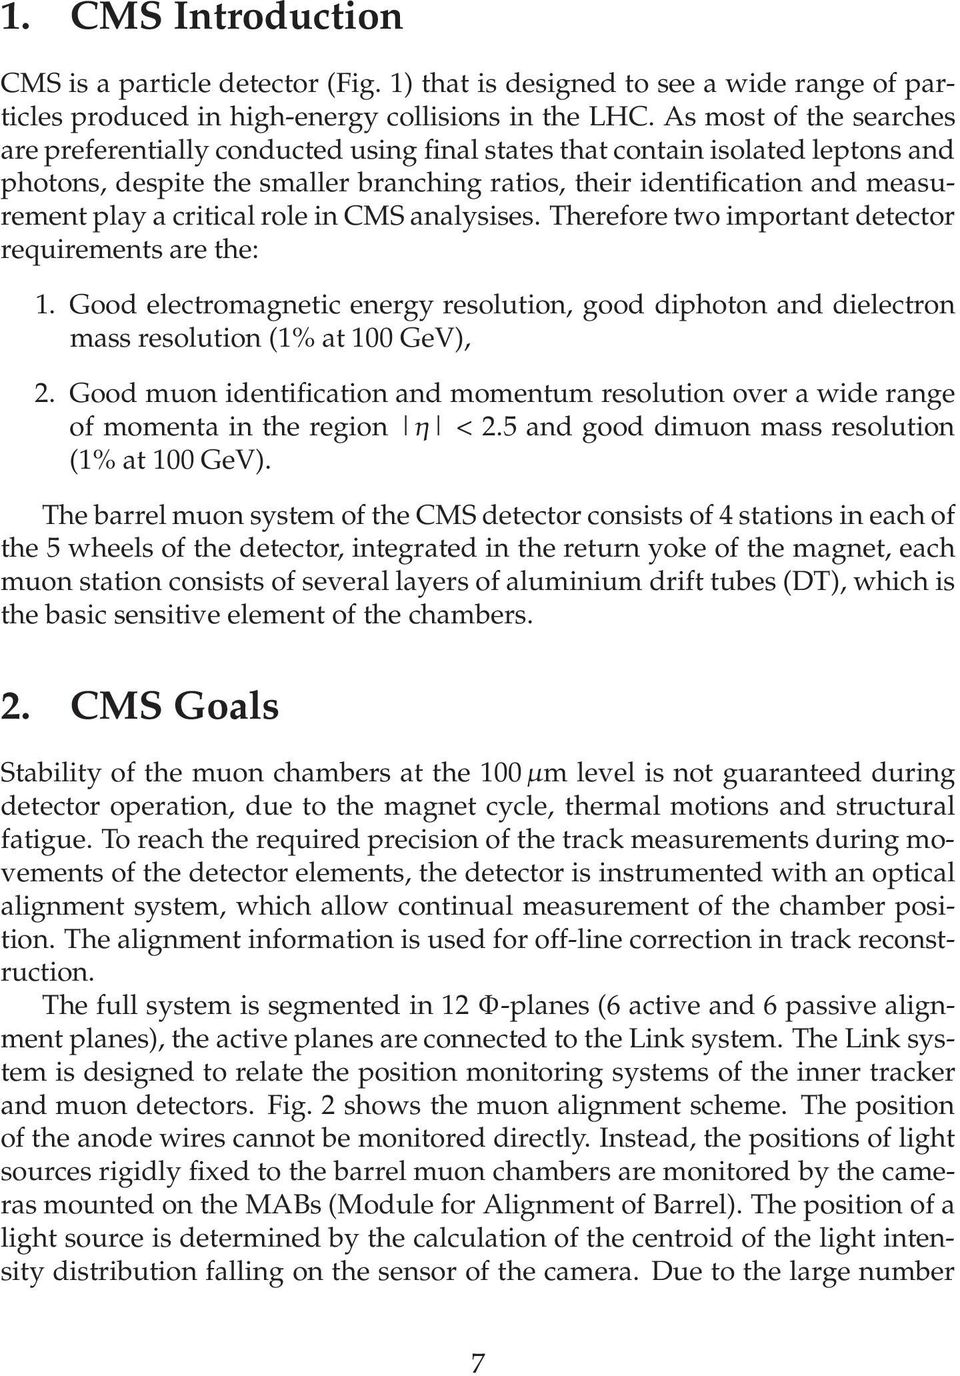 critical role in CMS analysises. Therefore two important detector requirements are the: 1. Good electromagnetic energy resolution, good diphoton and dielectron mass resolution(1% at 100 GeV), 2.